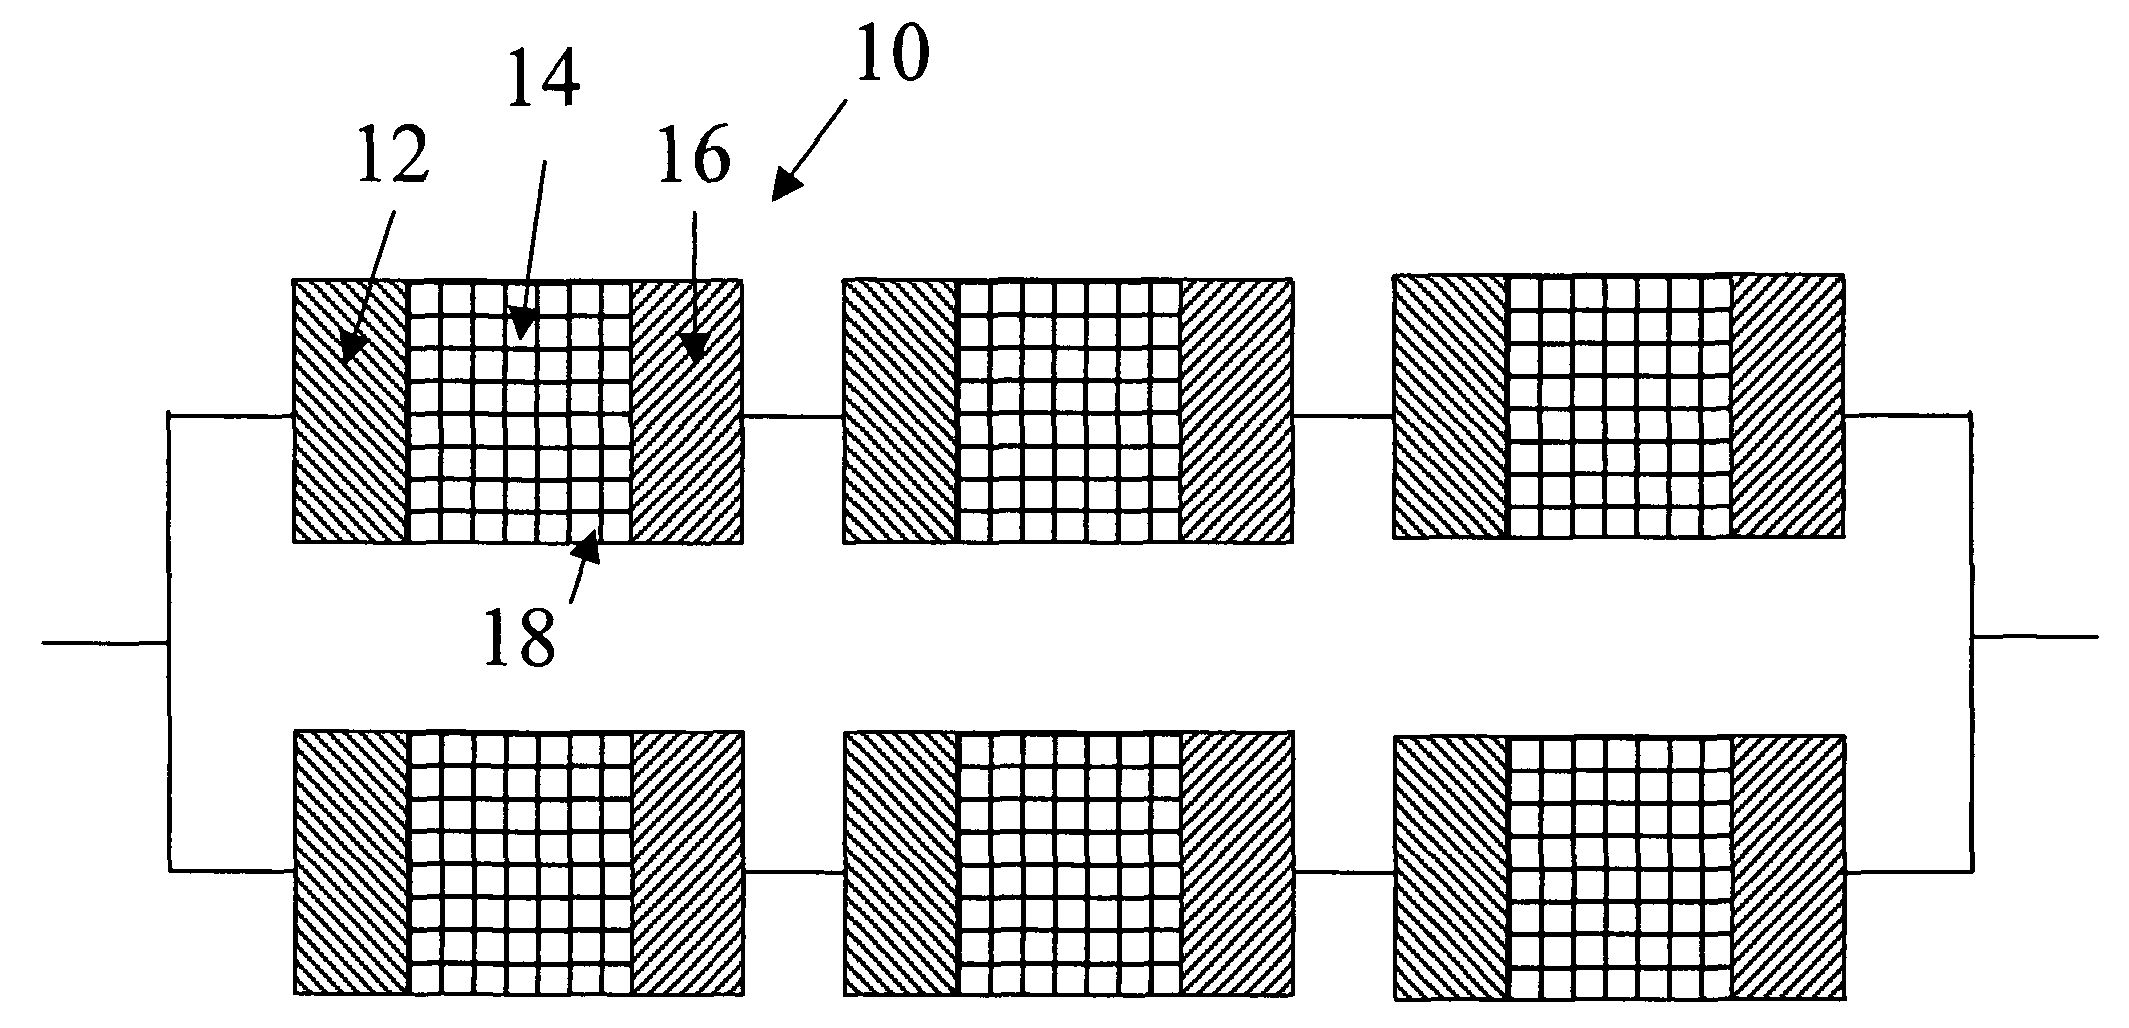 Lithium metal oxide electrodes for lithium batteries